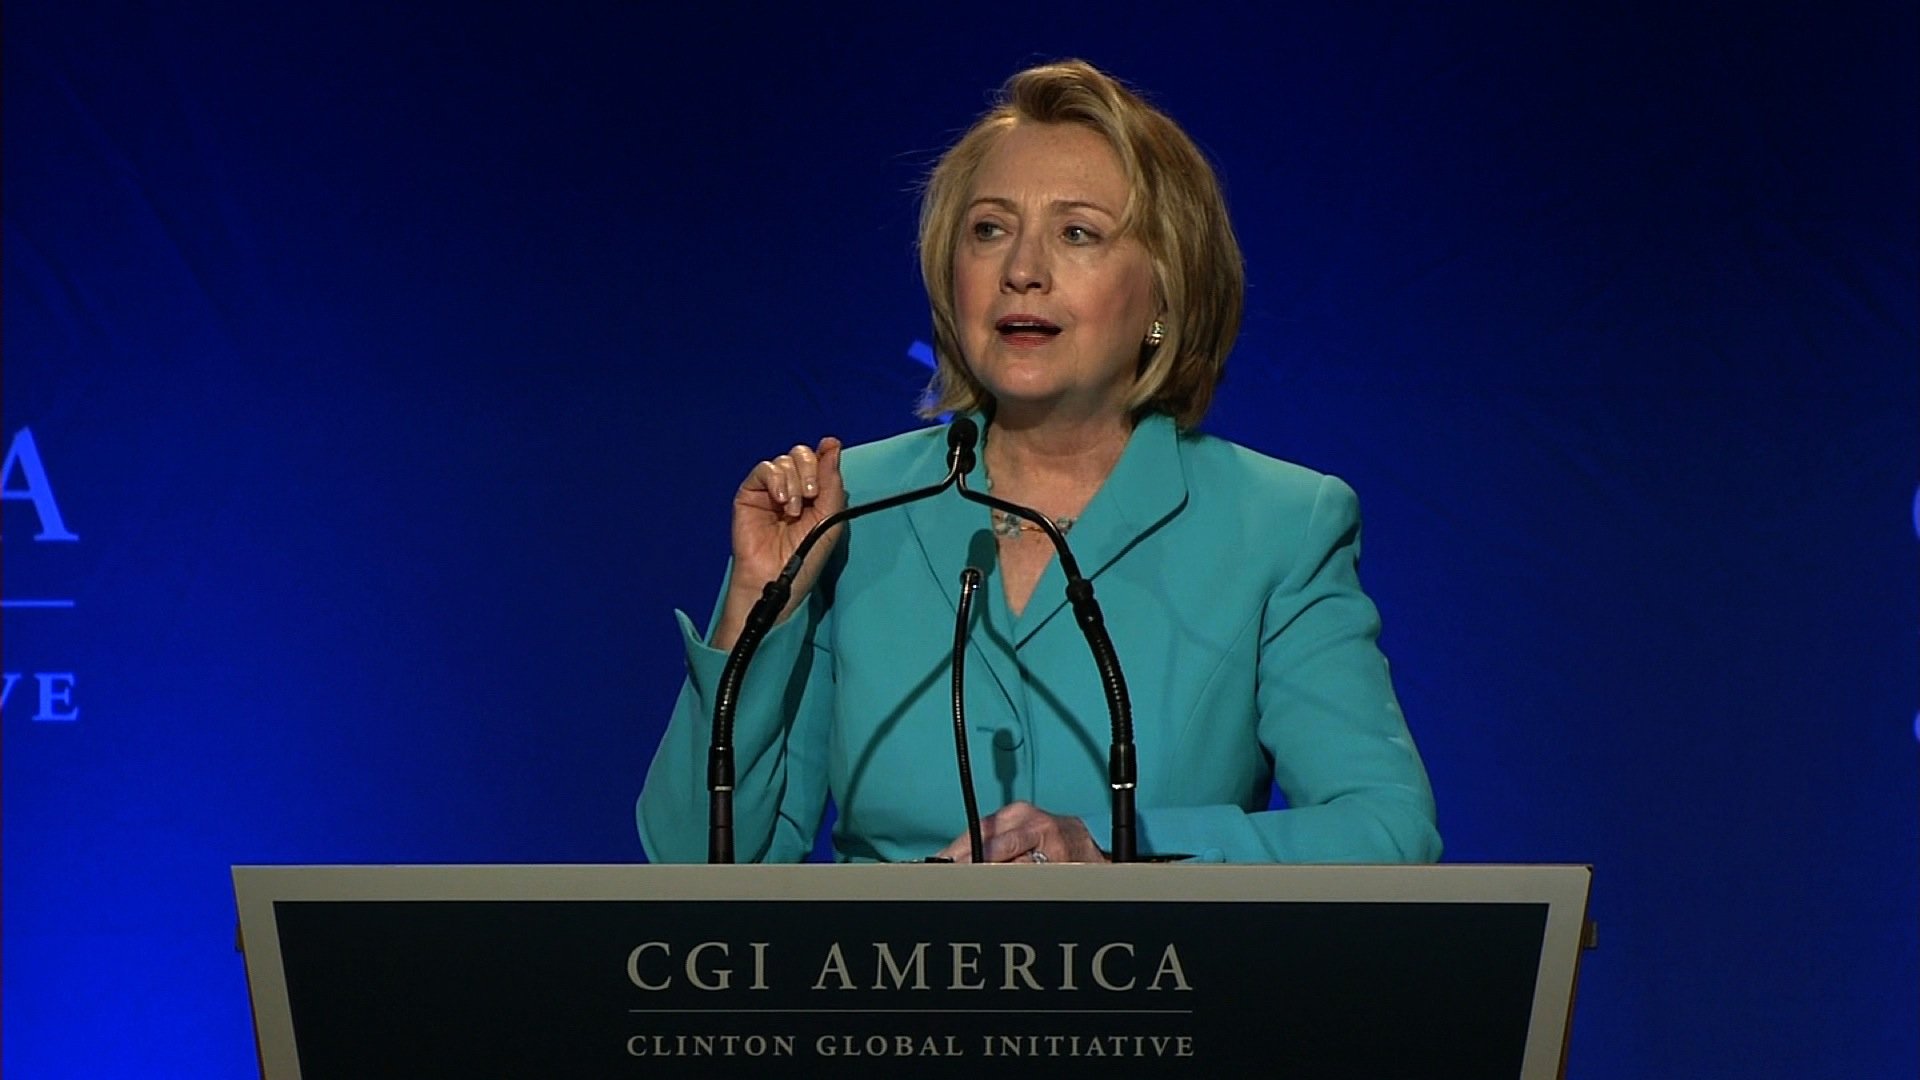 Clinton Speaking At A Global Initiative Meeting In Chicago